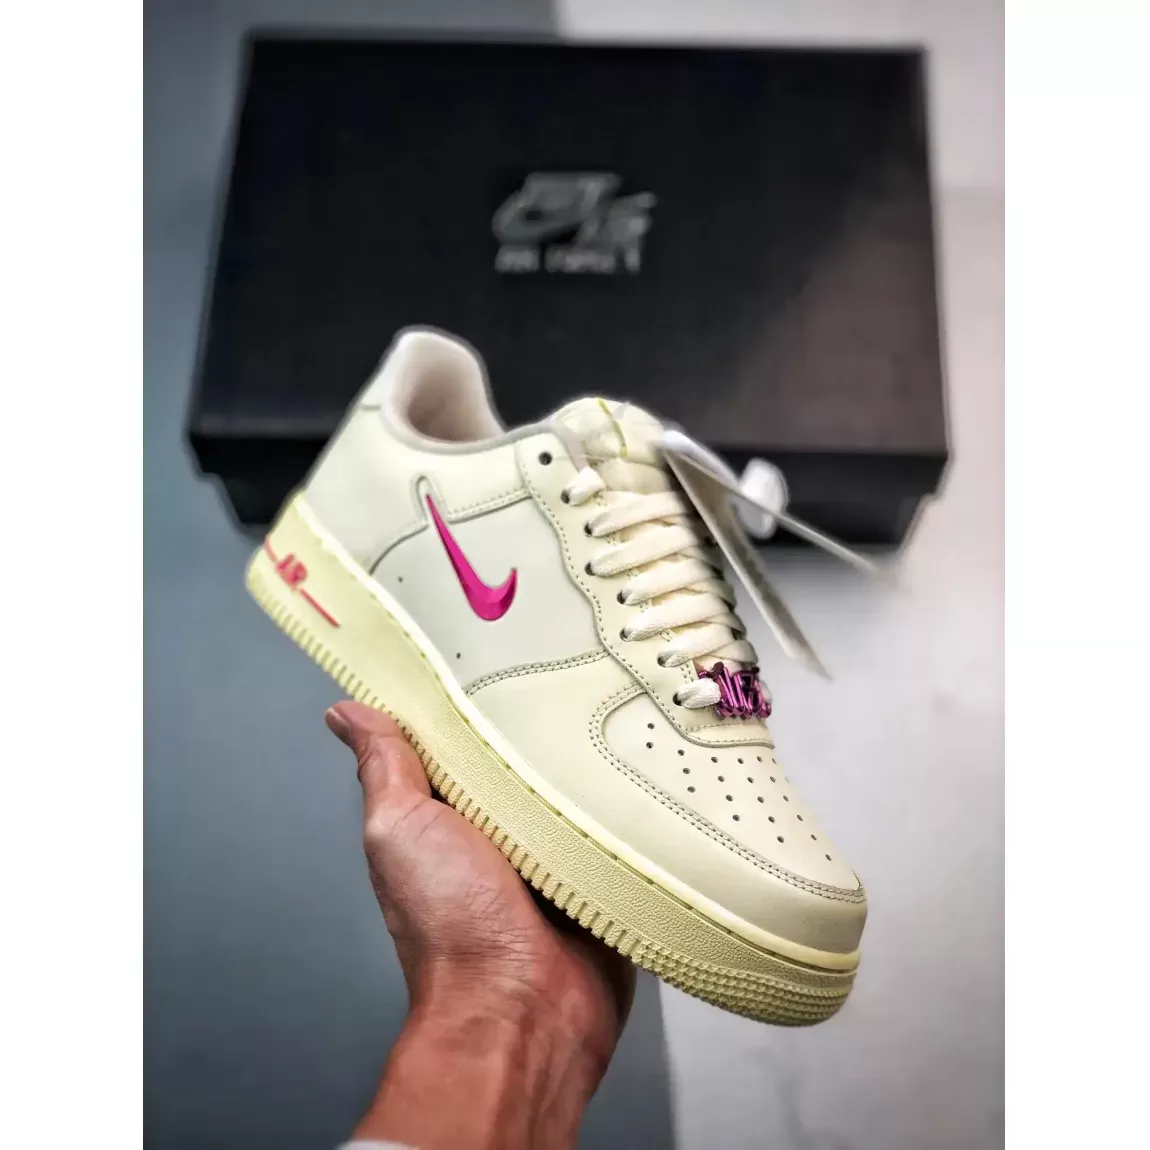 How Much Is Nike Air Force 1 Low Se Just Do It Coconut Milk Playful Pink